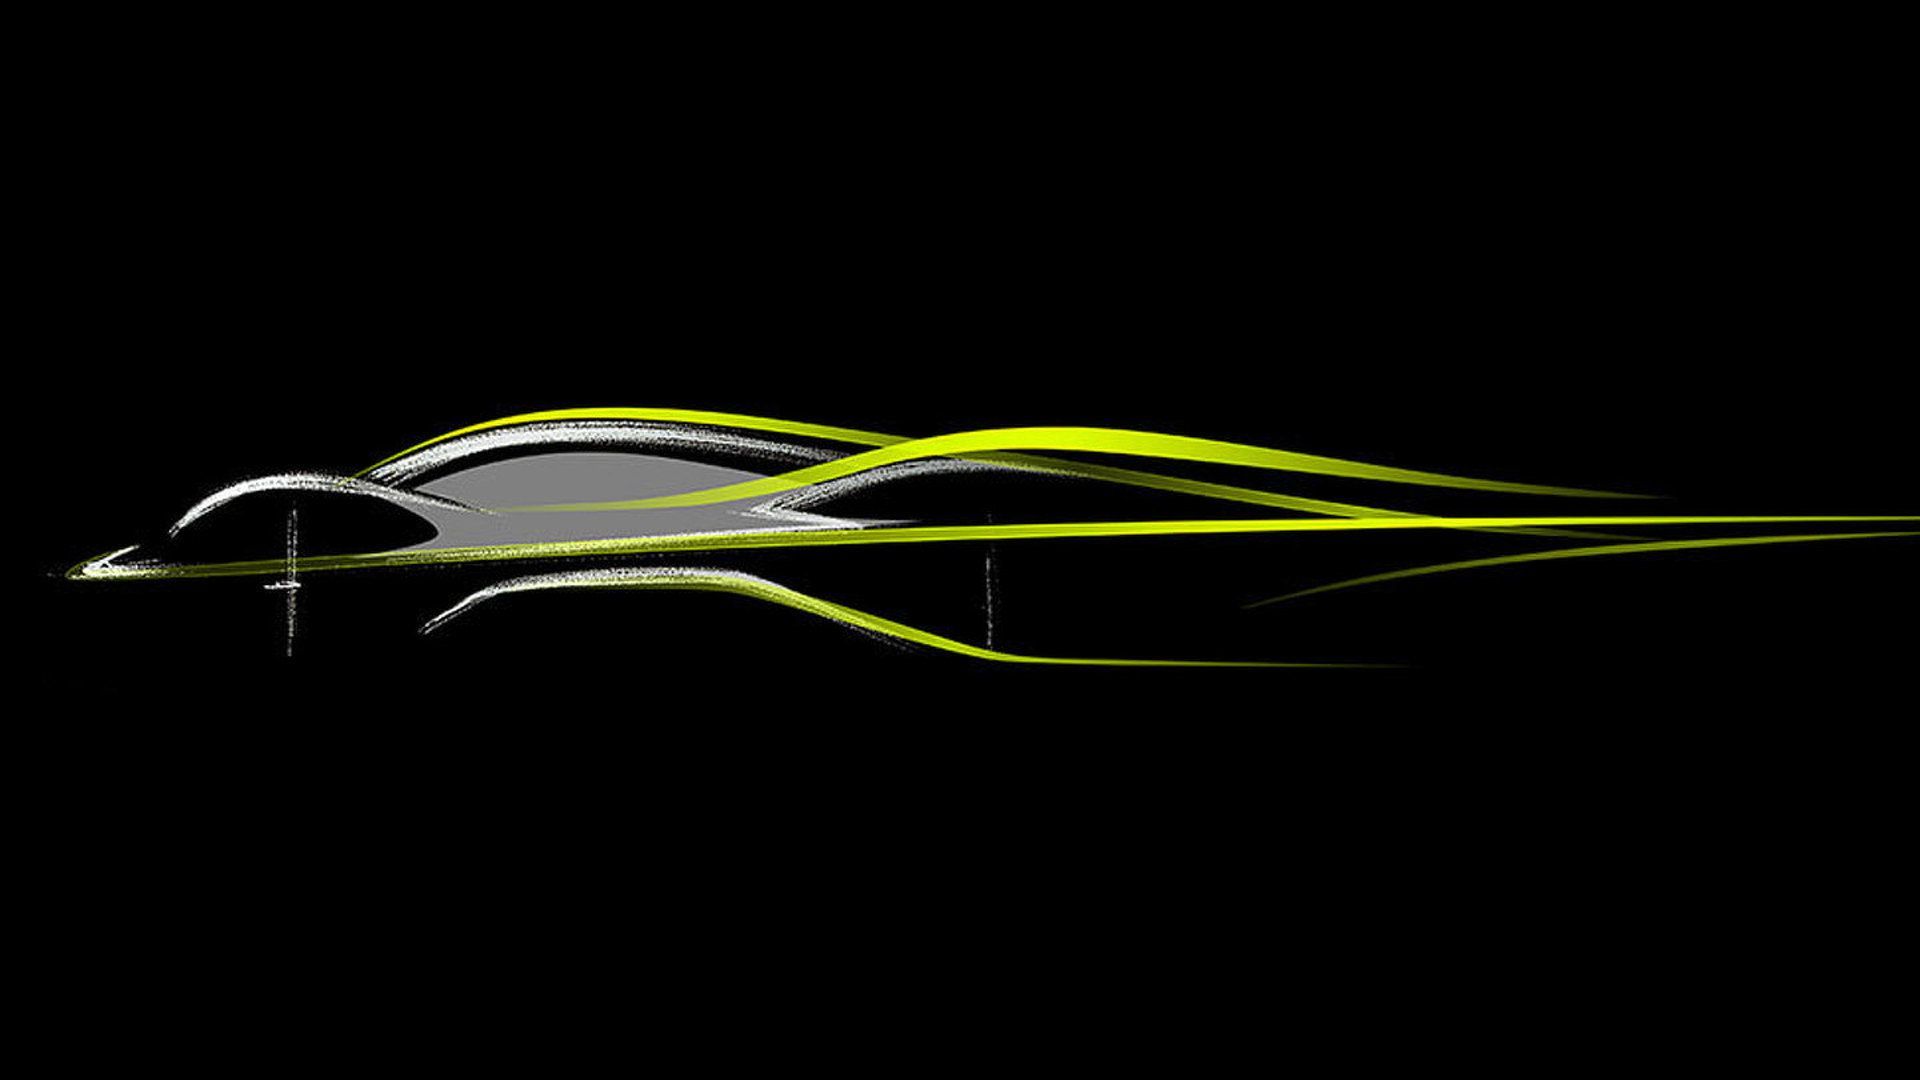 Aston Martin and Red Bull Racing to Create Next Generation Hypercar